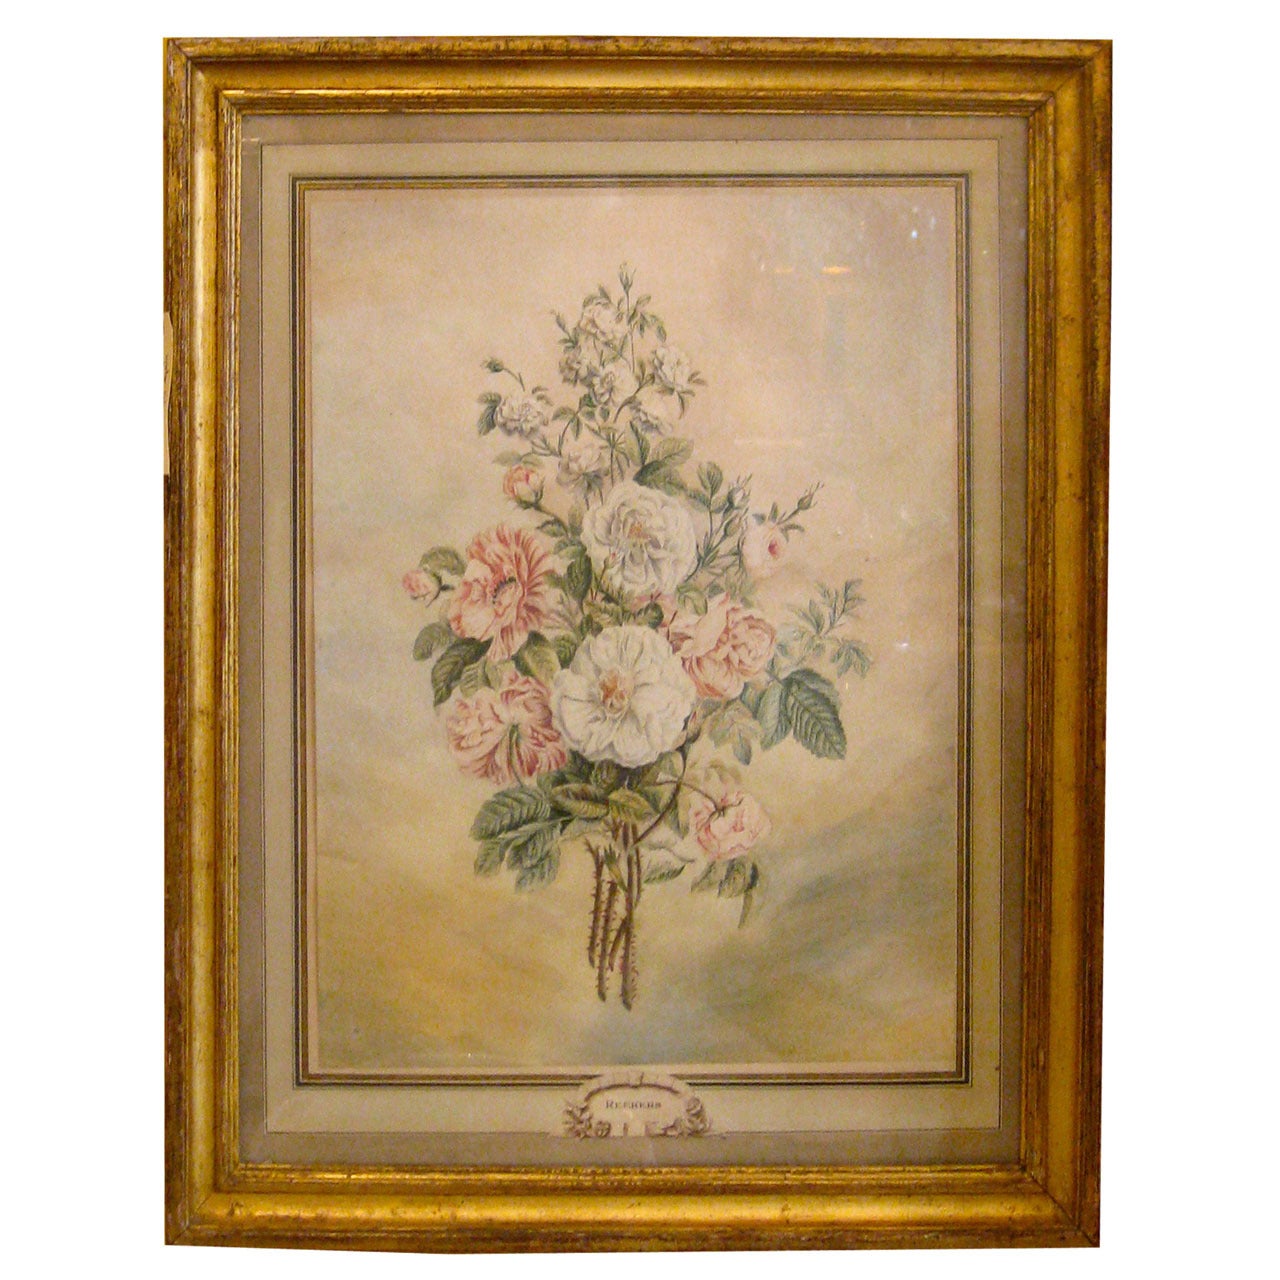 Pair of Dutch 18th Century Floral Watercolors of Roses and Carnations